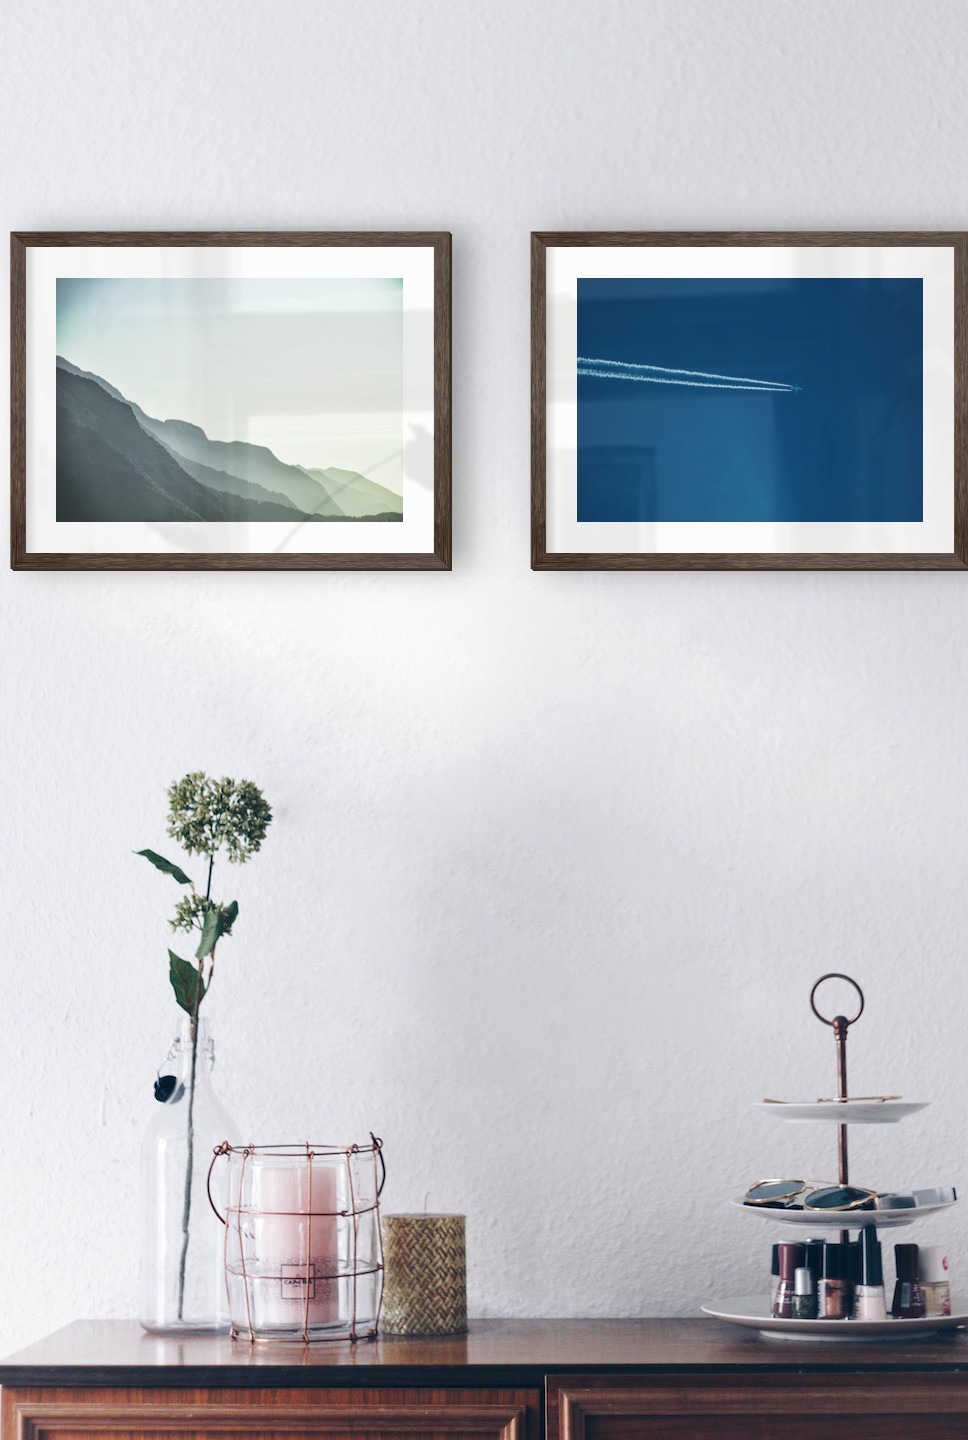 Gallery wall with picture frames in dark wood in sizes 30x40 with prints "Foggy mountain" and "Airplanes in the air"